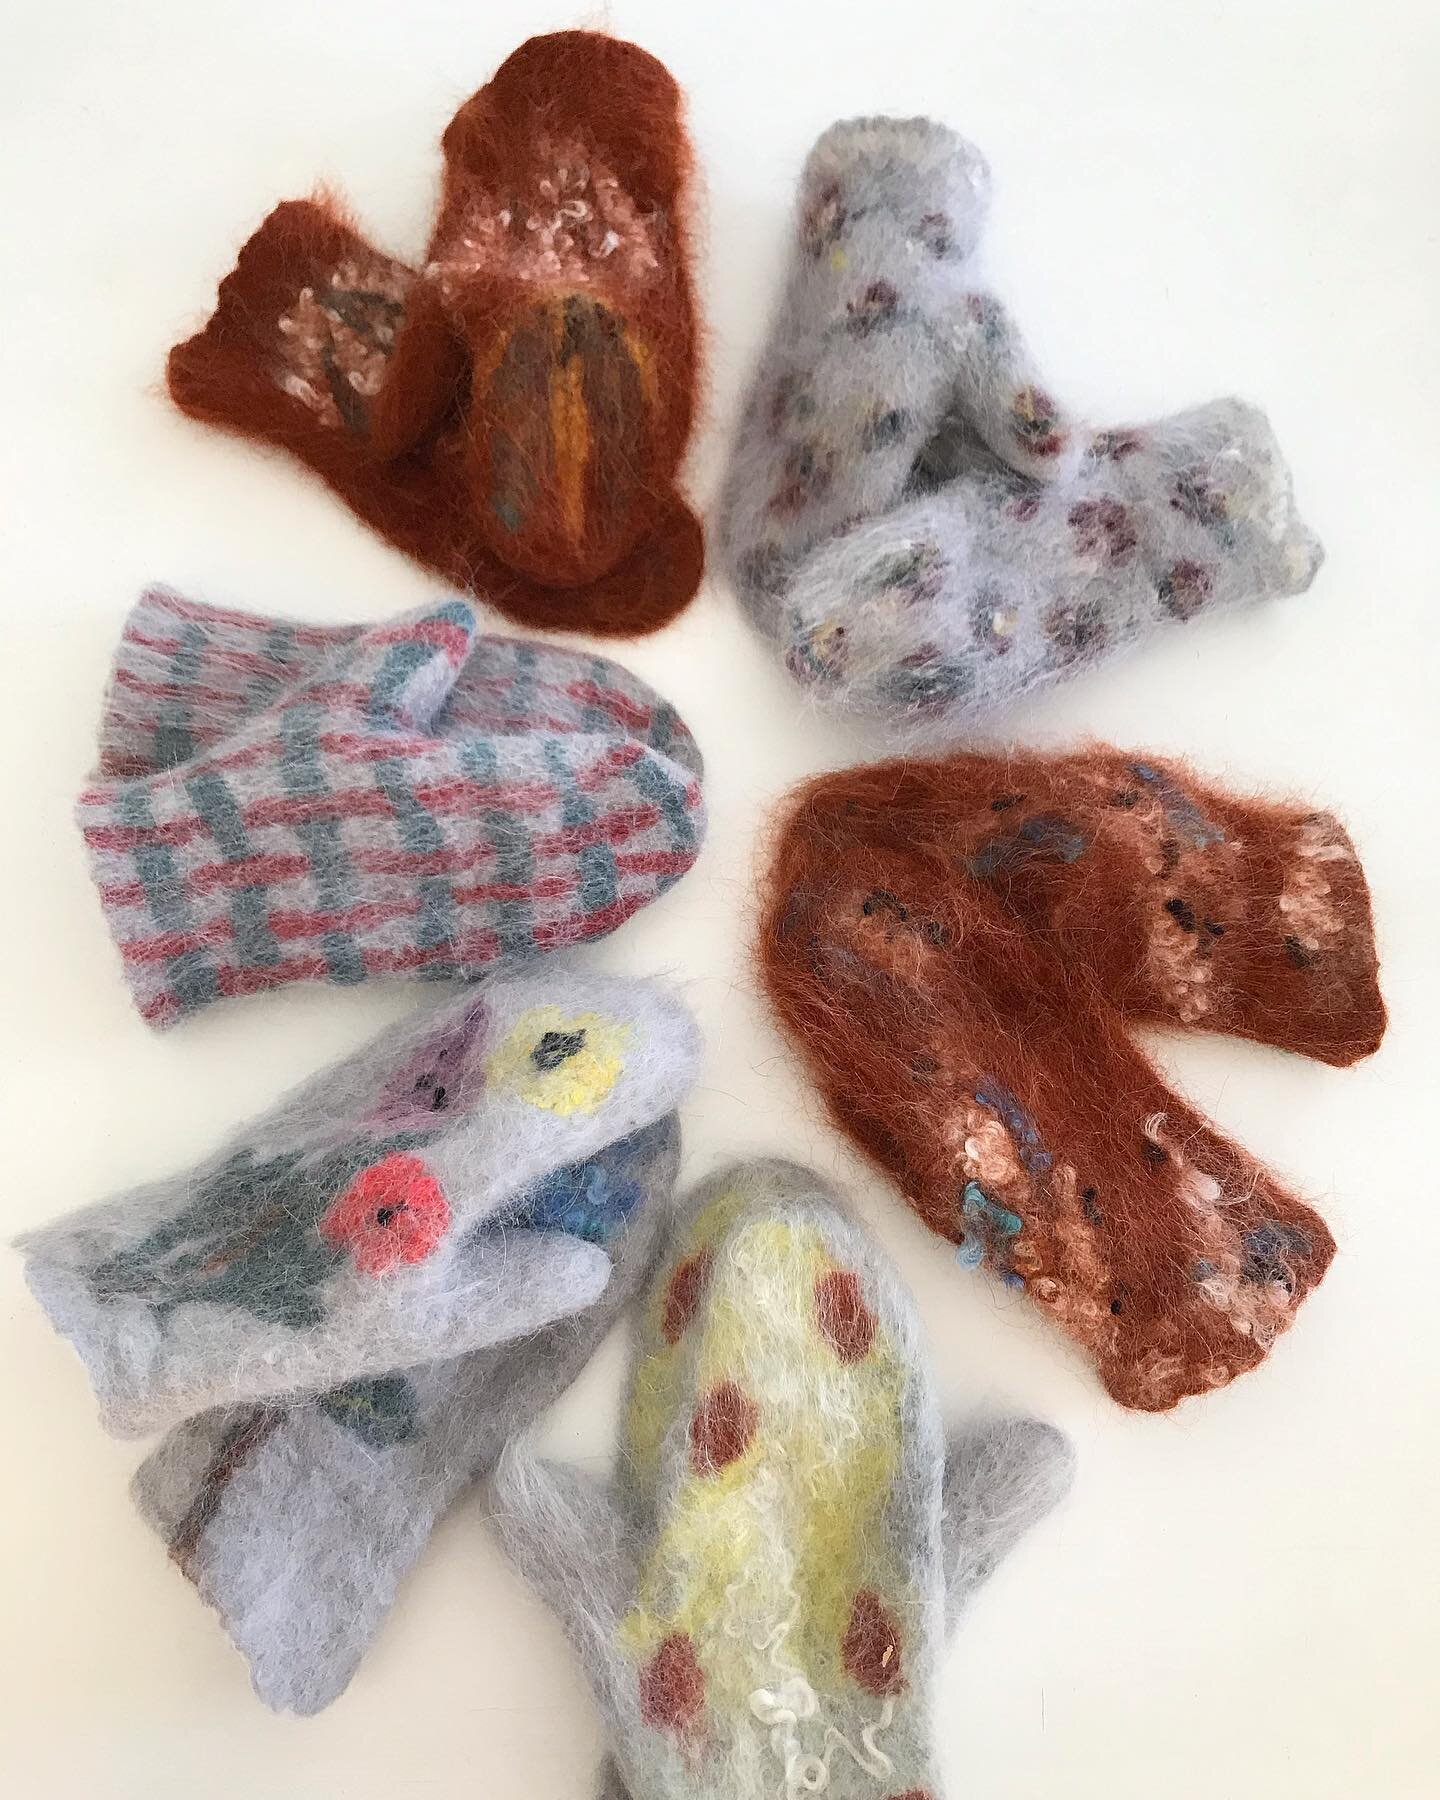 We wet felted mittens today! It was very satisfying and a major workout! 🥵 Thank you to one of our newest instructors @sovalarisa for sharing this process with us! Your love for wool is infectious. #wetfelting #felting #wetfeltingmittens #yegworksho